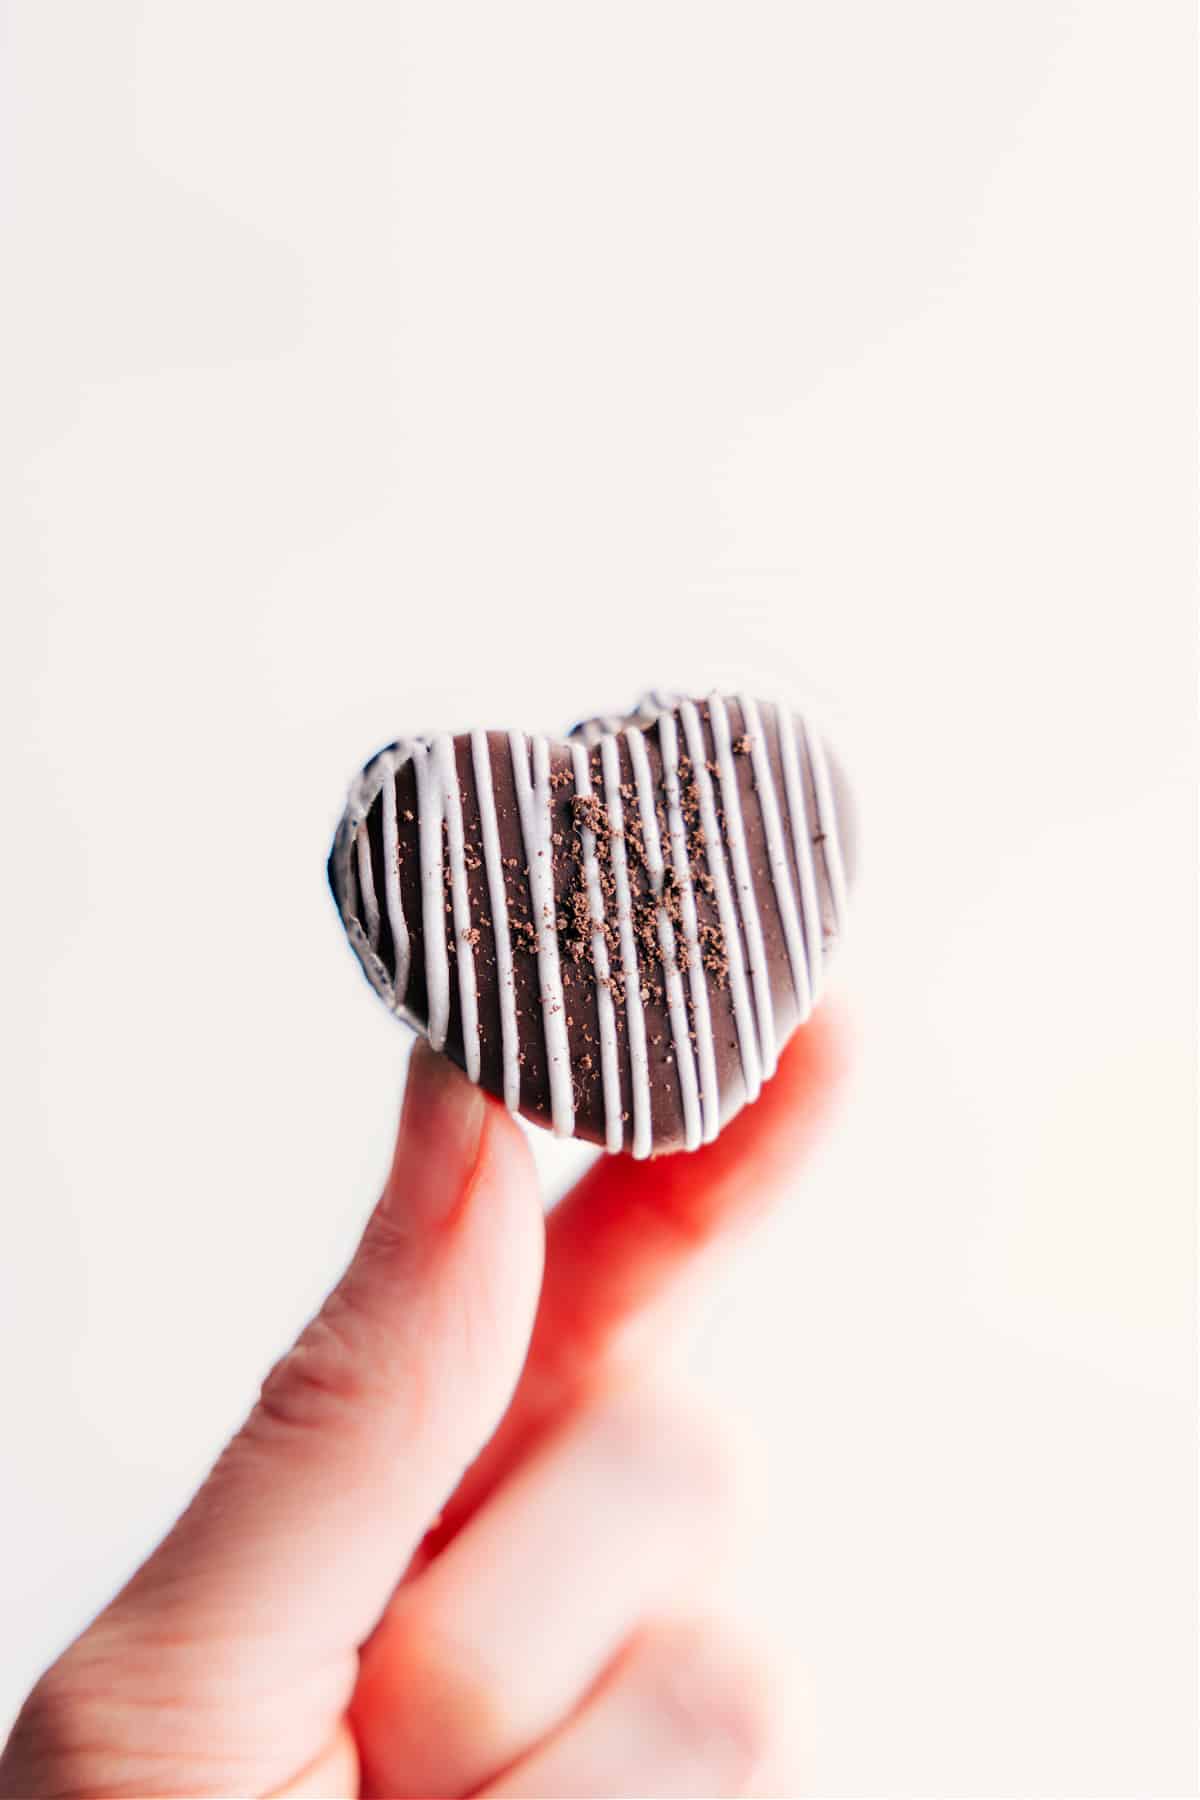 One of the Heart Oreo Truffles being held up.